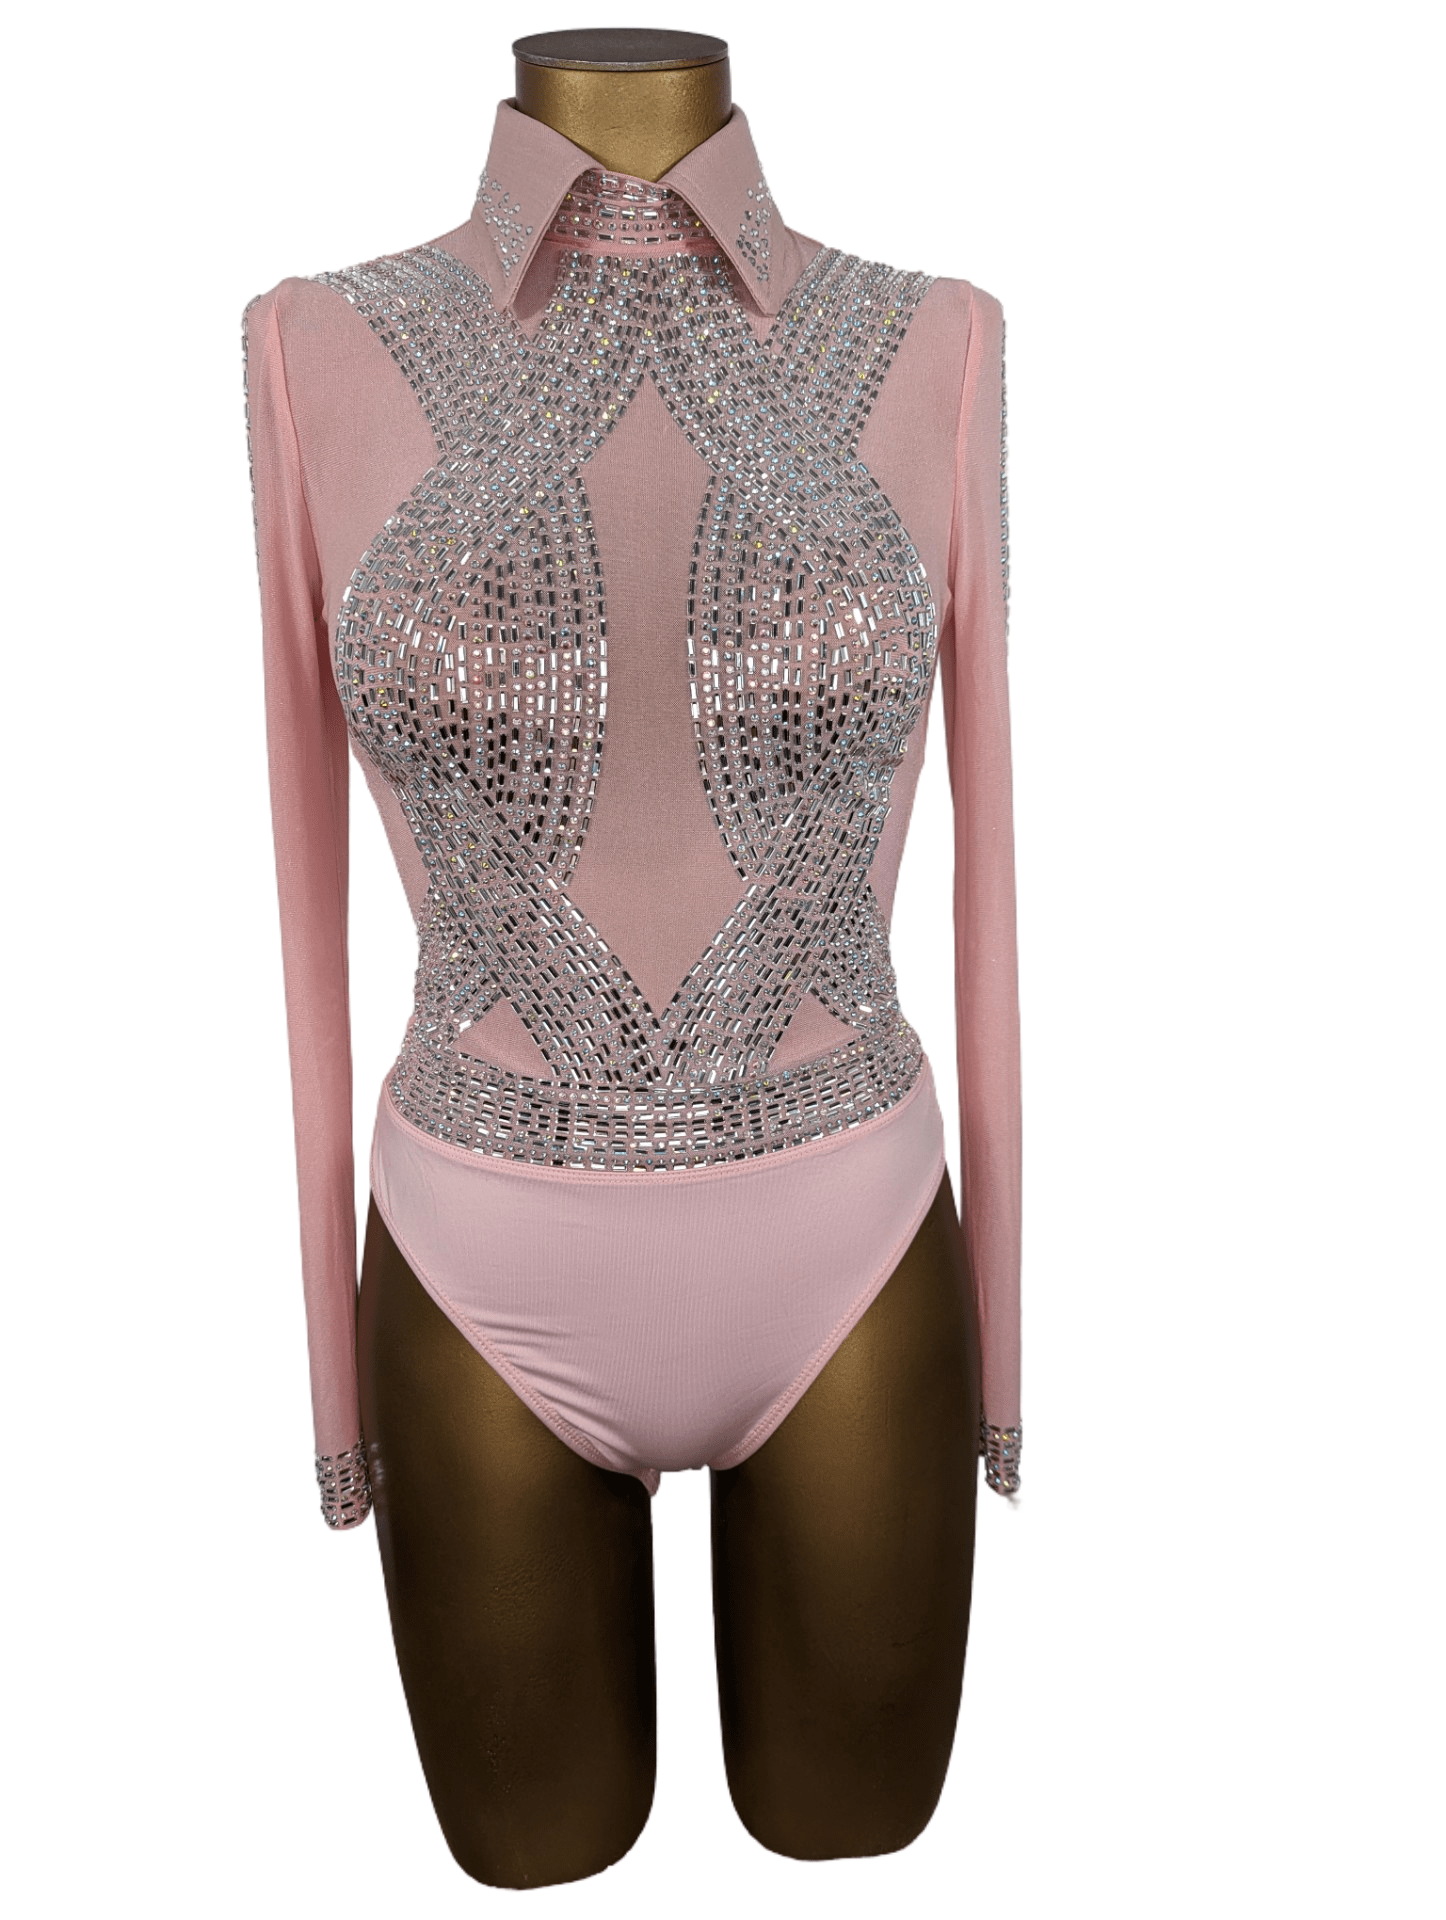 sparkle-ridge-womens-western-wear-affordable-show-clothes-horse-shirts-with-bling-rodeo-bodysuit-light-pink-elegant-darling-front.png (Copy) (Copy)